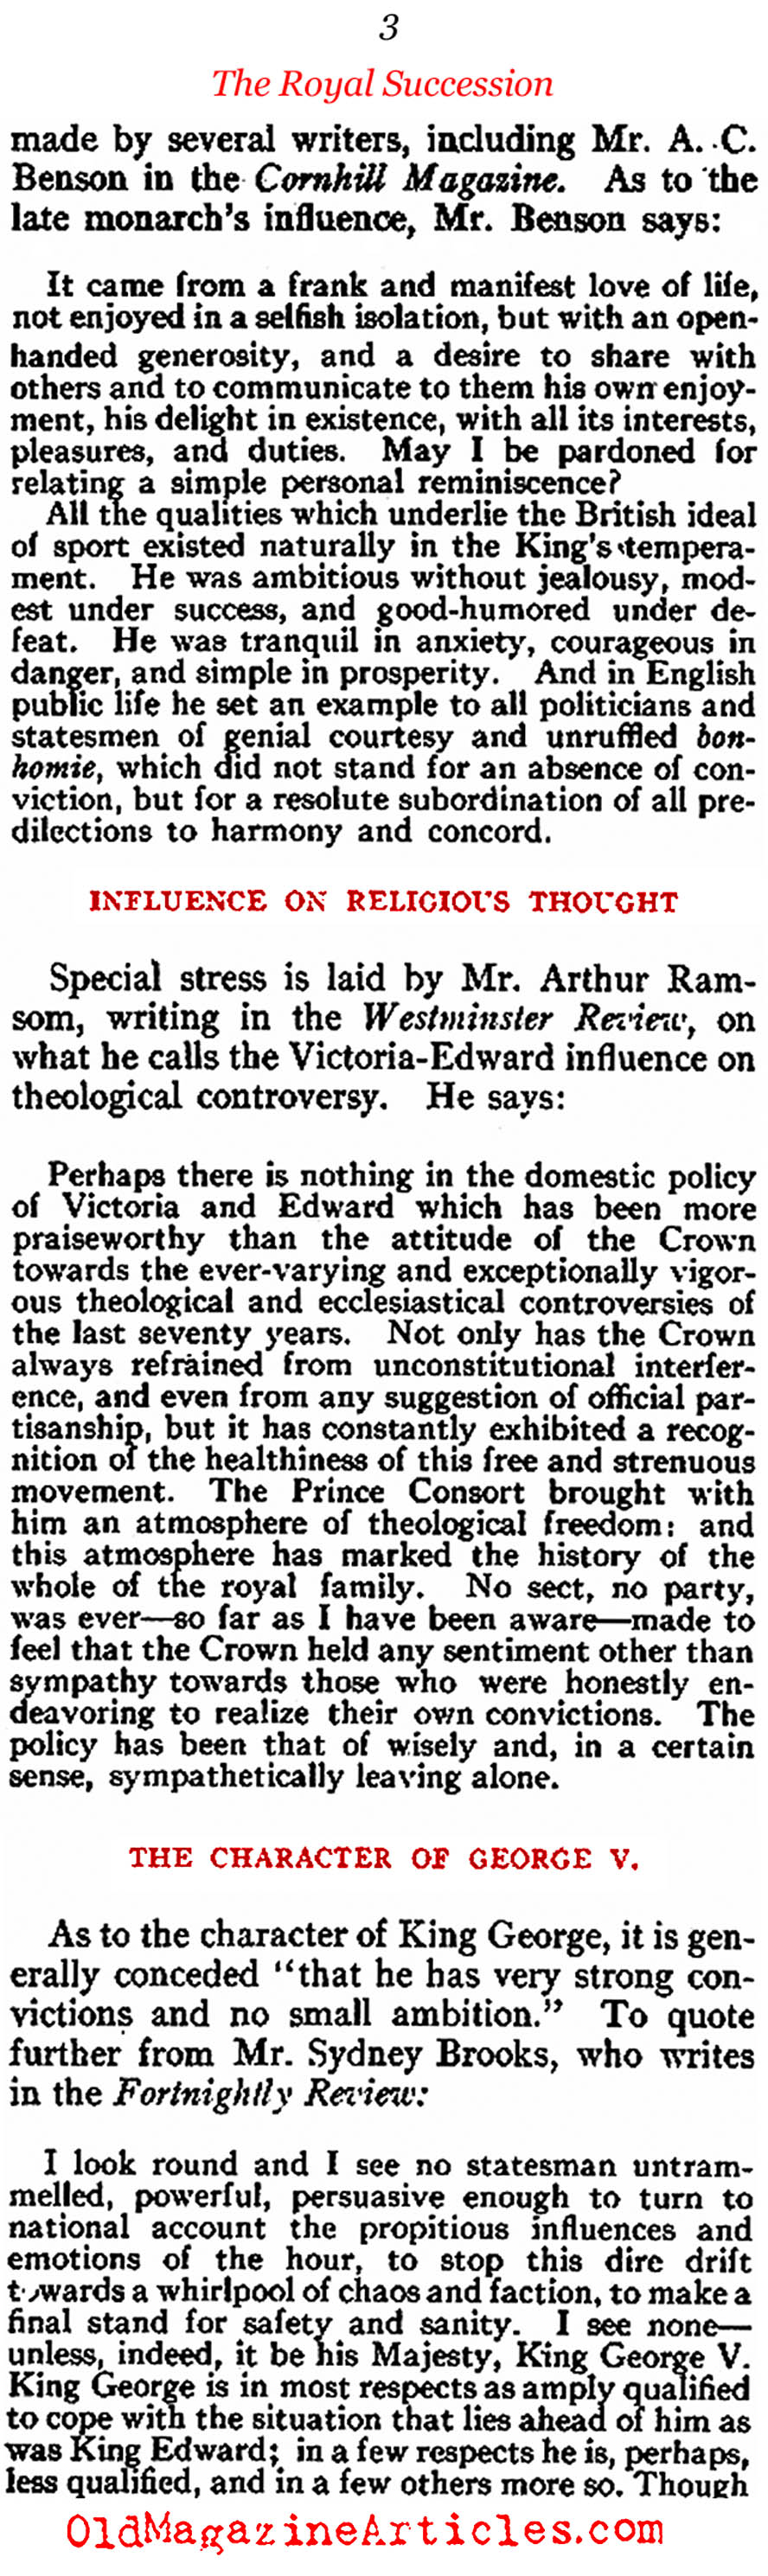 The Death of Edward VII & the Accession George V (Review of Reviews, 1910)